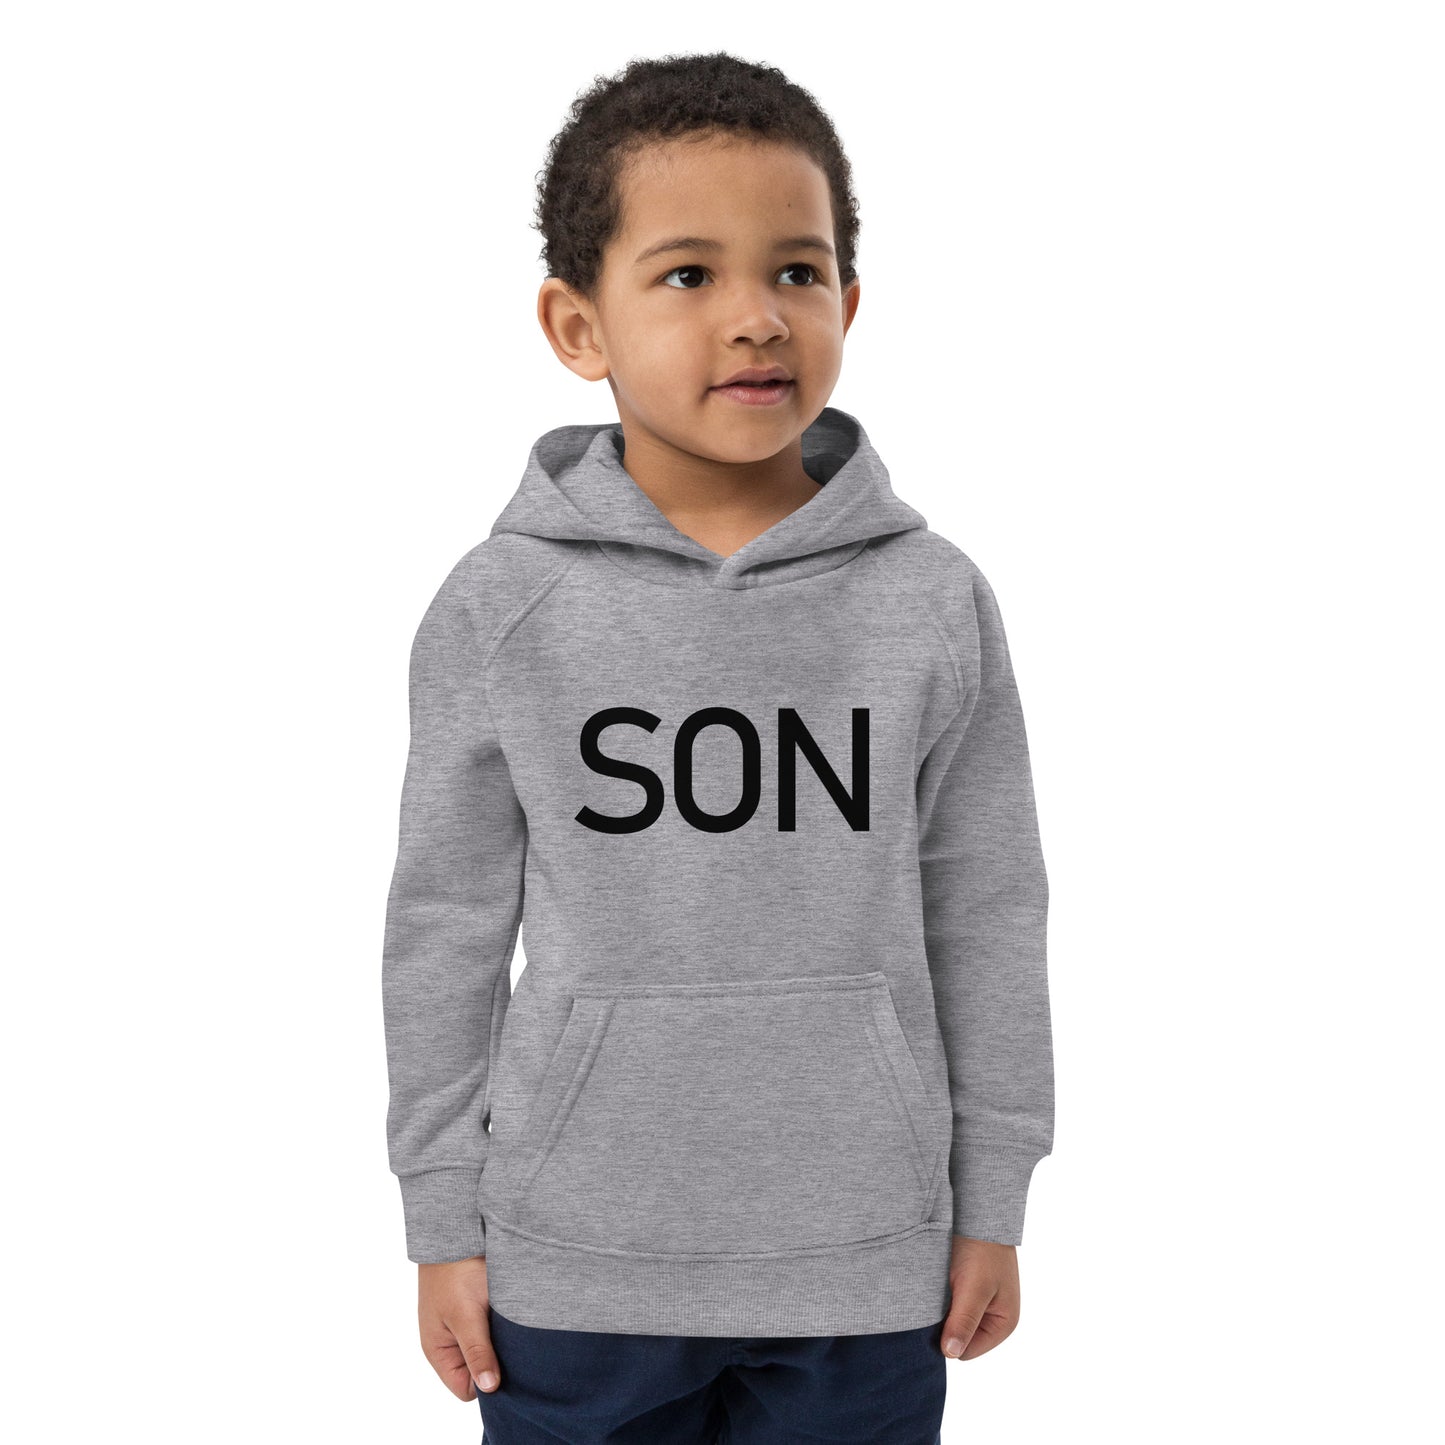 Son - Sustainably Made Toddler Hoodie